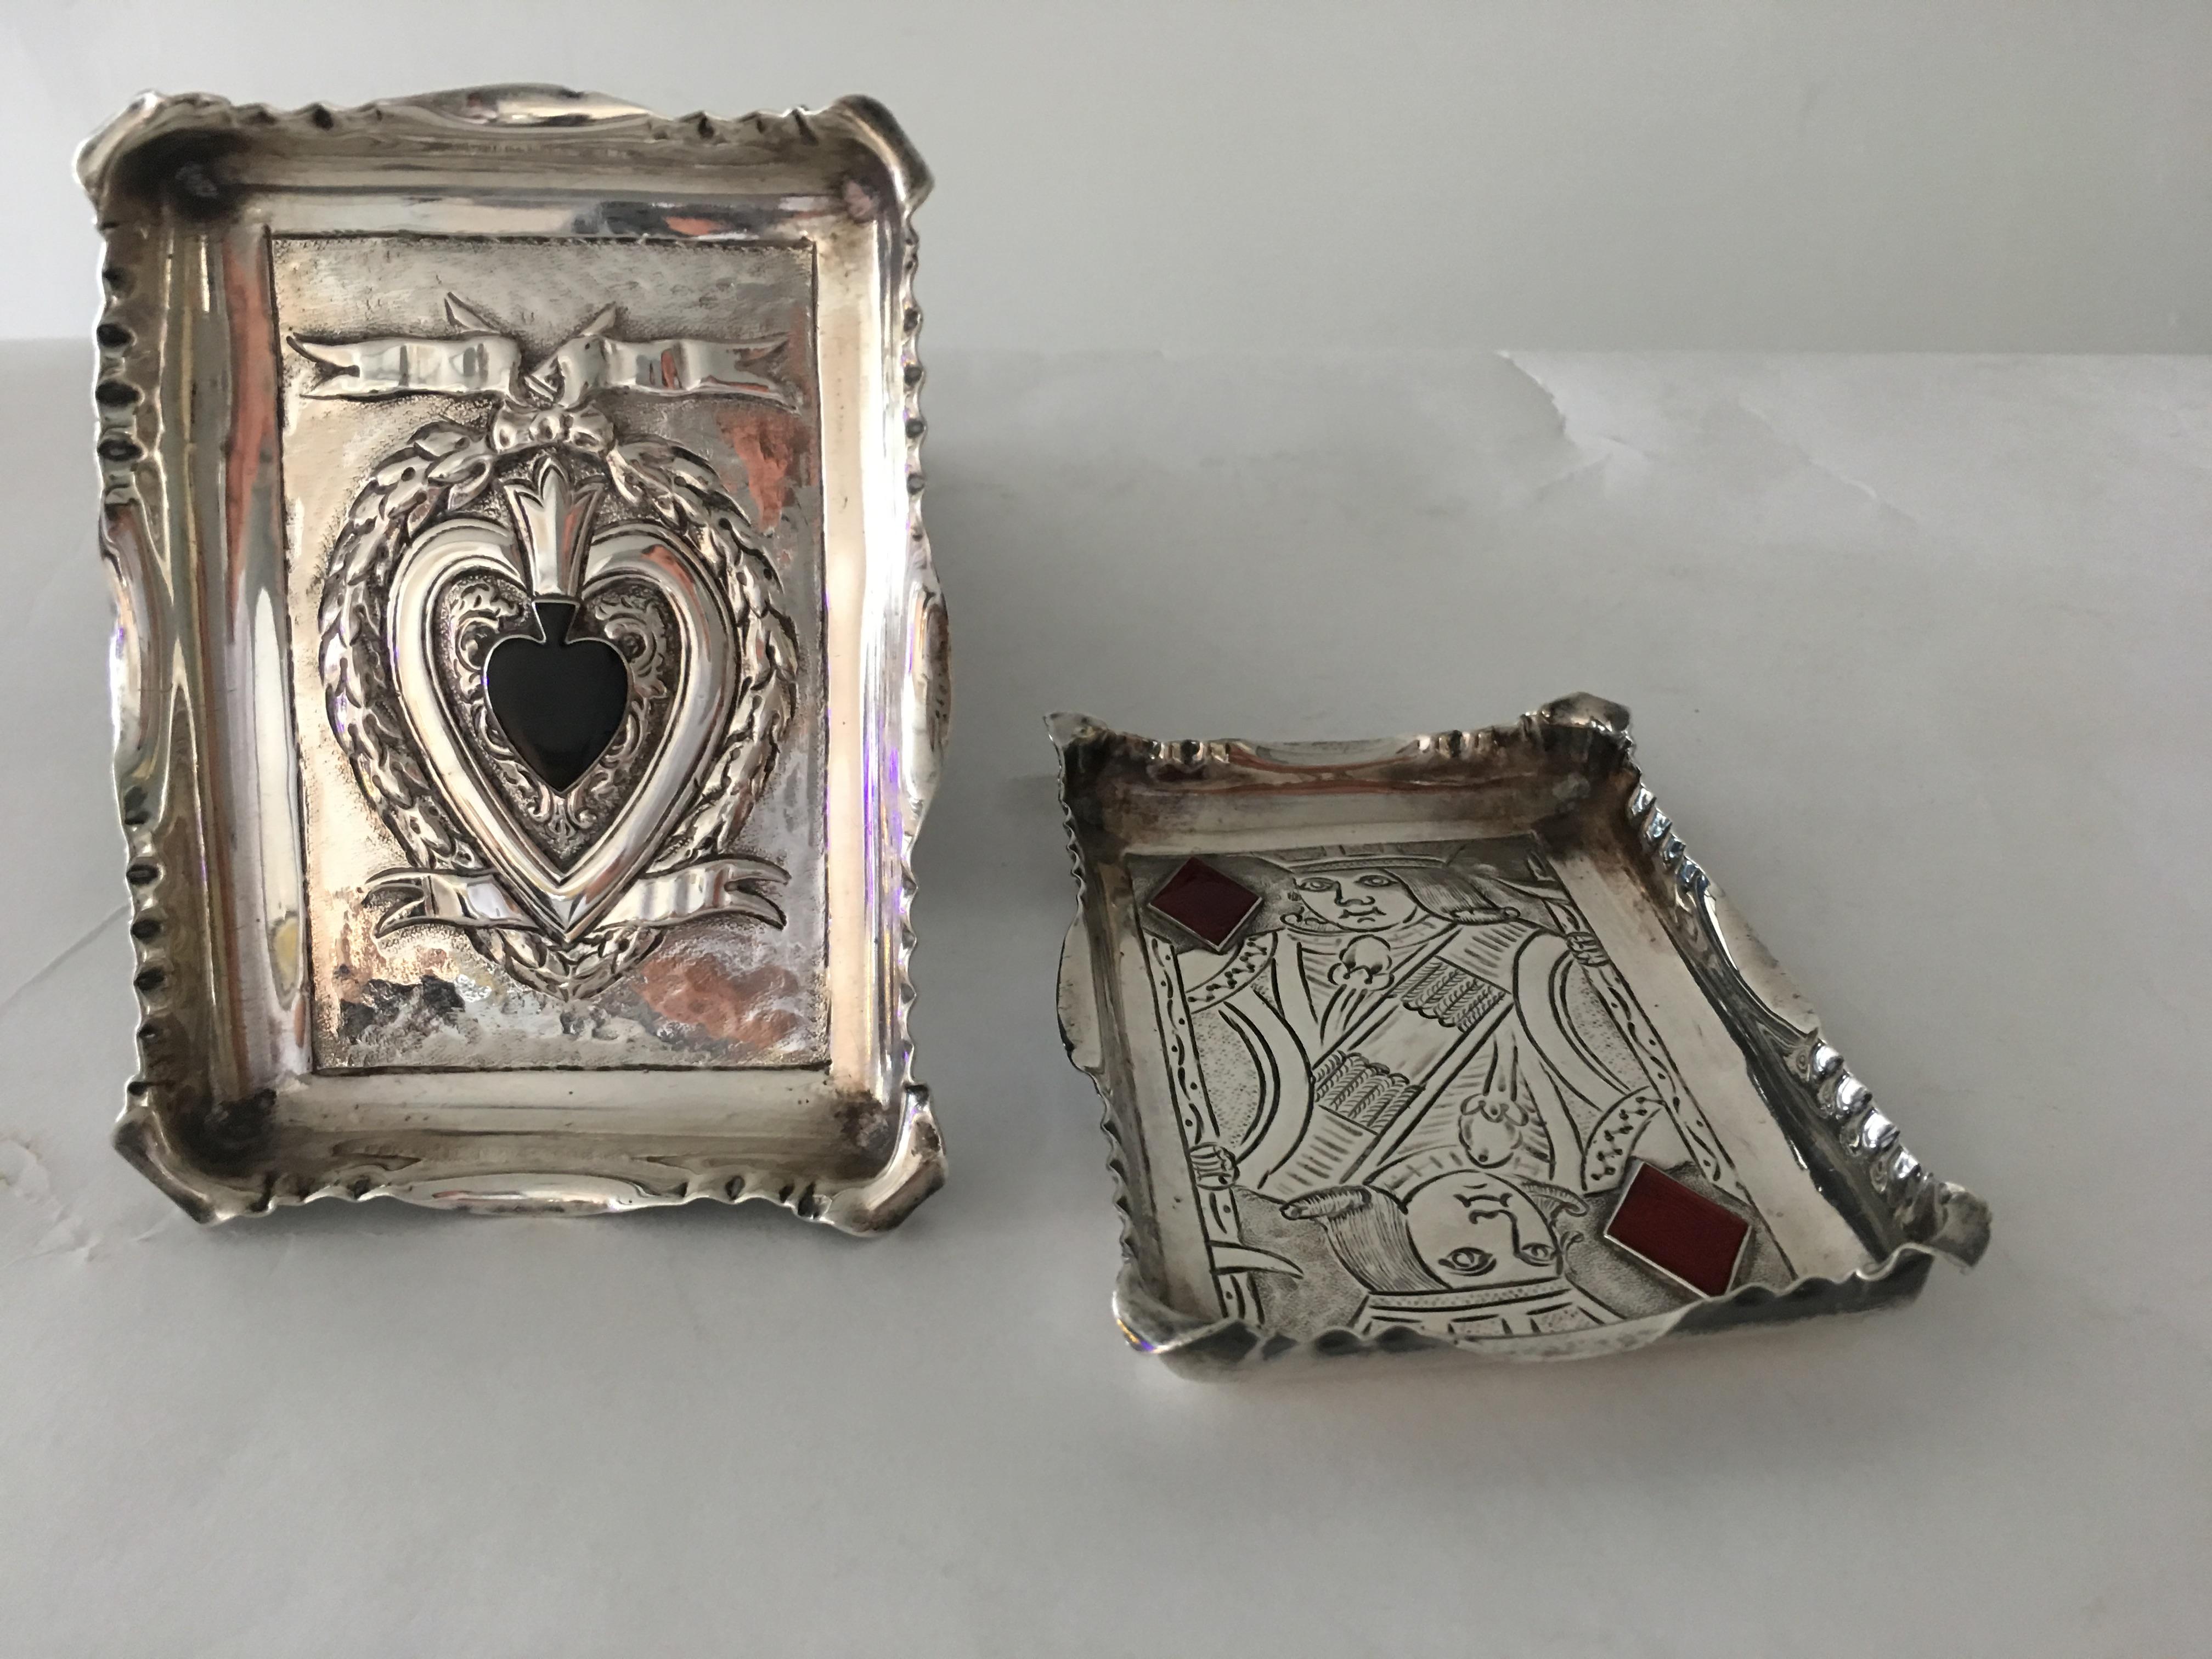 Pair of sterling silver trays with stone inlay. By Millar Wilkinson, St Michaels Alley Cornhill, England 1950s, with silver stamps on reverse side.